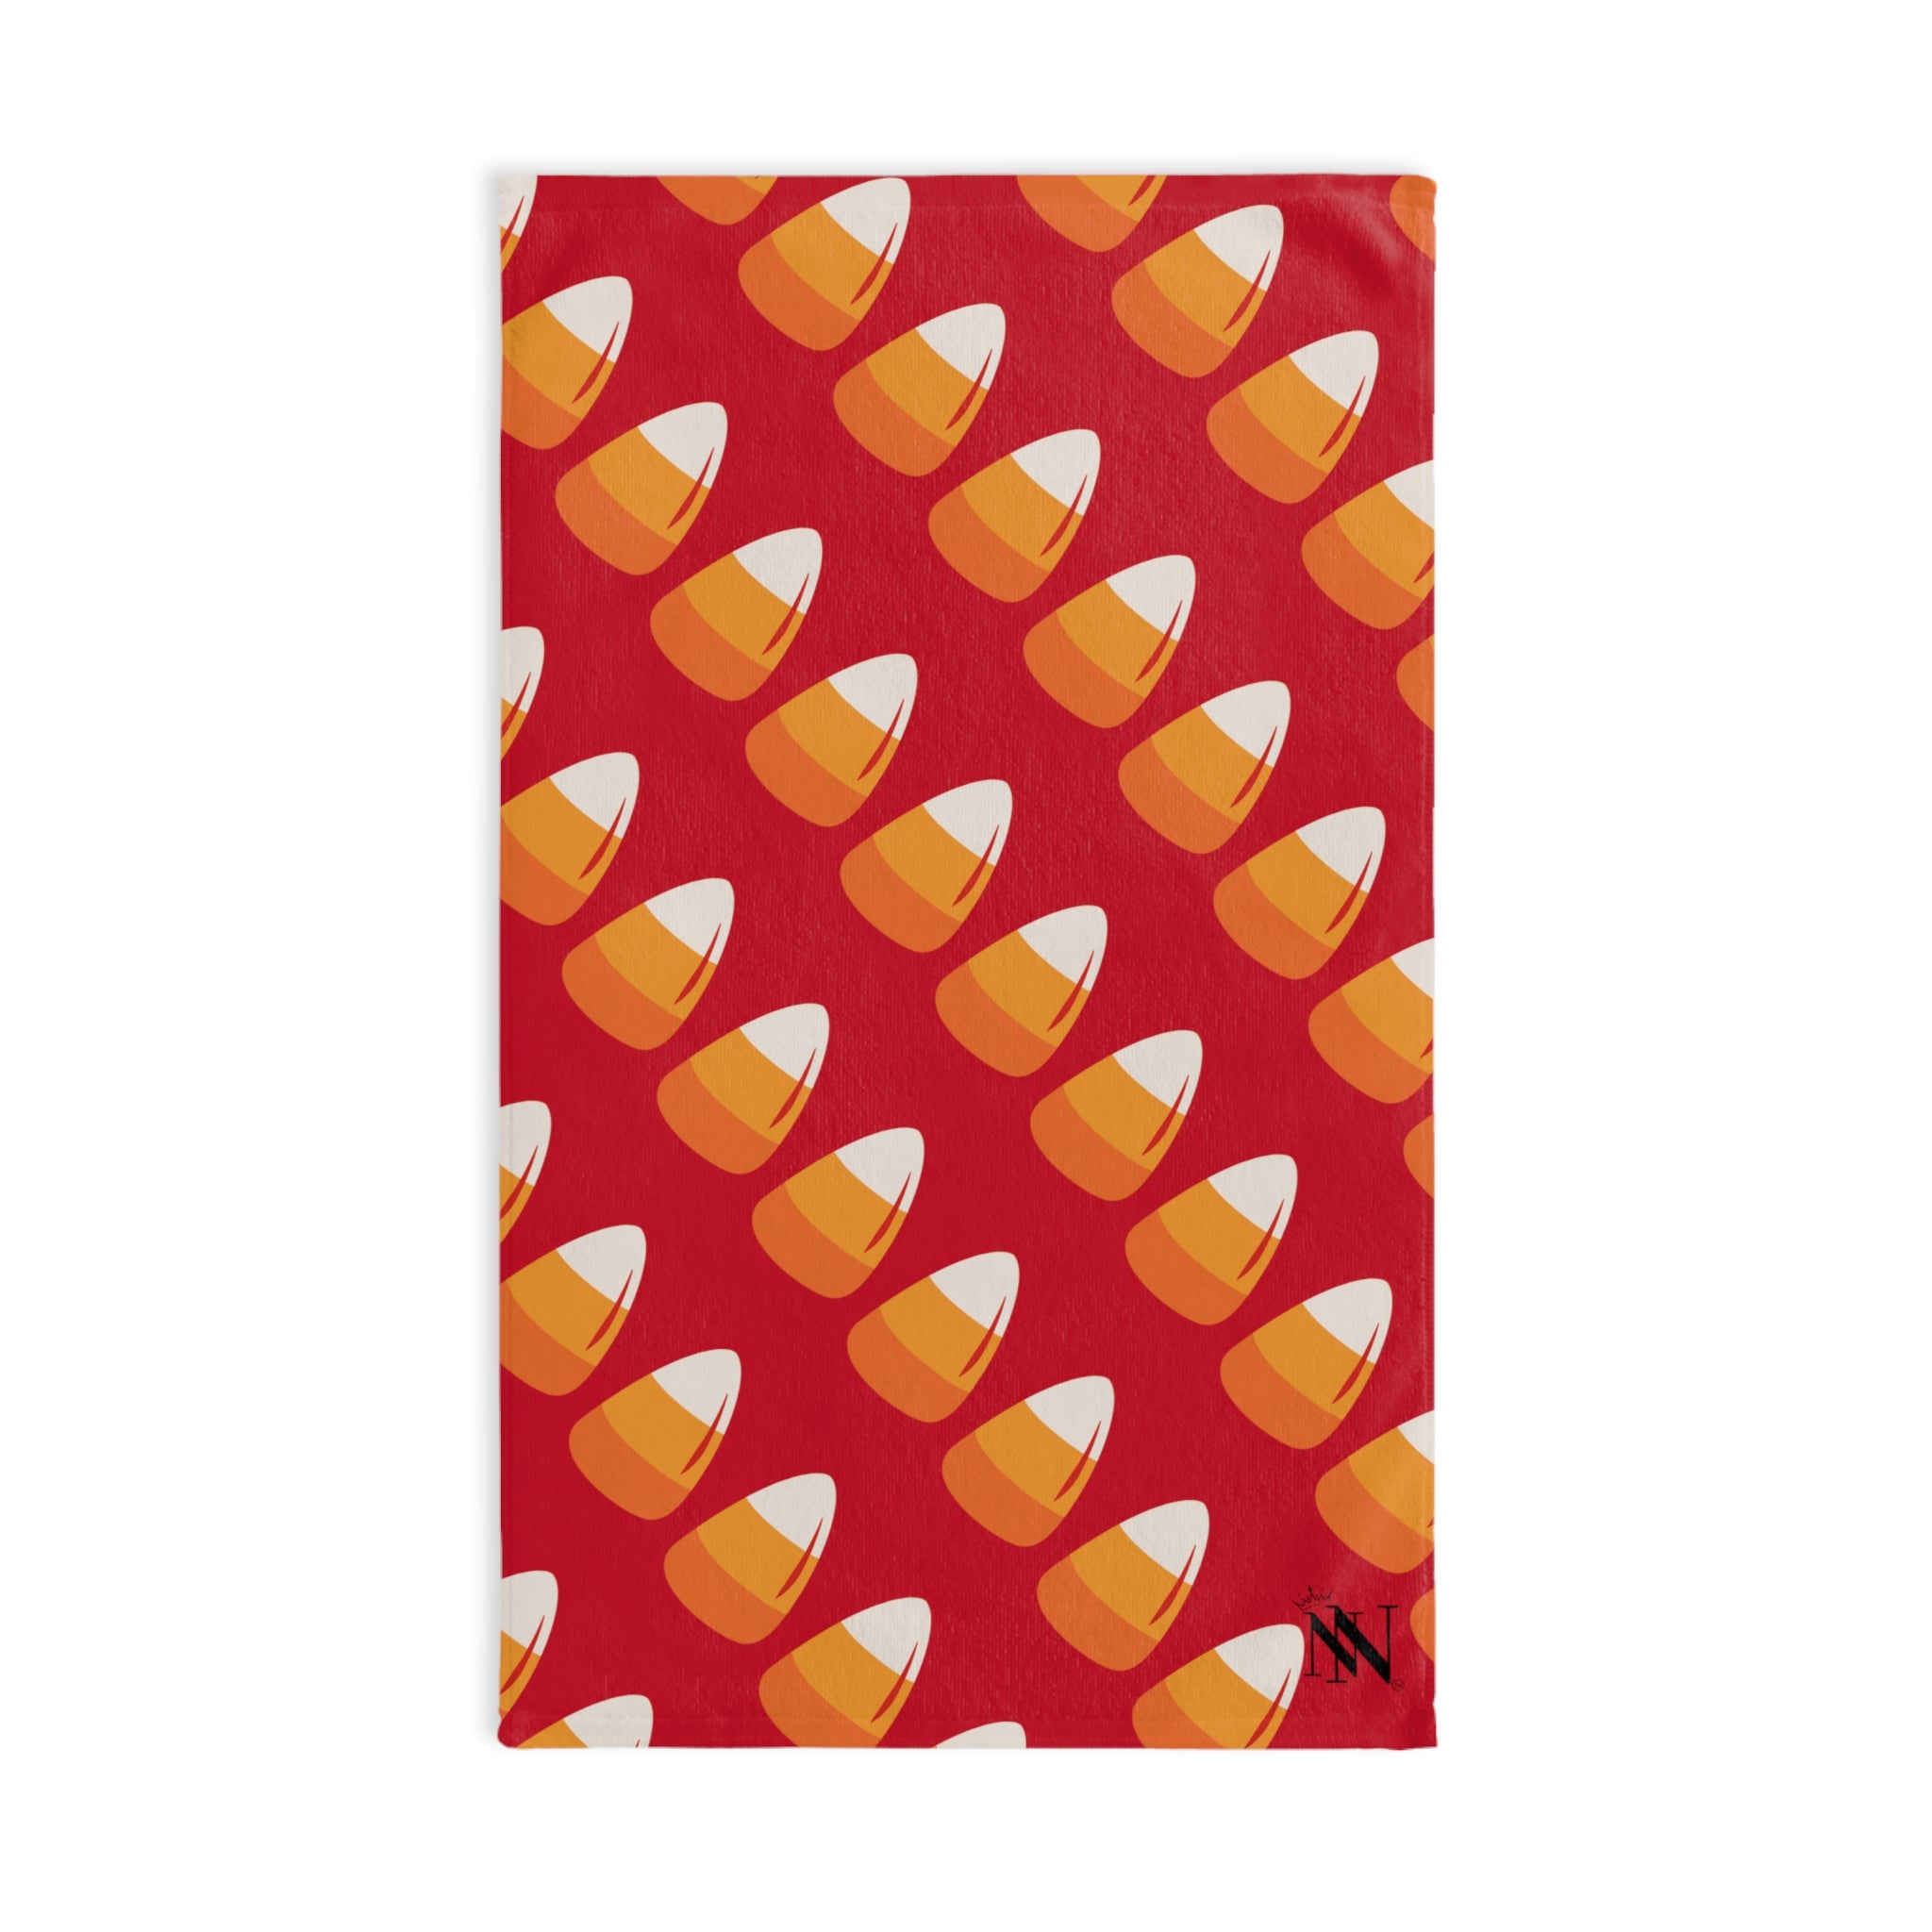 Candy Corn Red | Sexy Gifts for Boyfriend, Funny Towel Romantic Gift for Wedding Couple Fiance First Year 2nd Anniversary Valentines, Party Gag Gifts, Joke Humor Cloth for Husband Men BF NECTAR NAPKINS